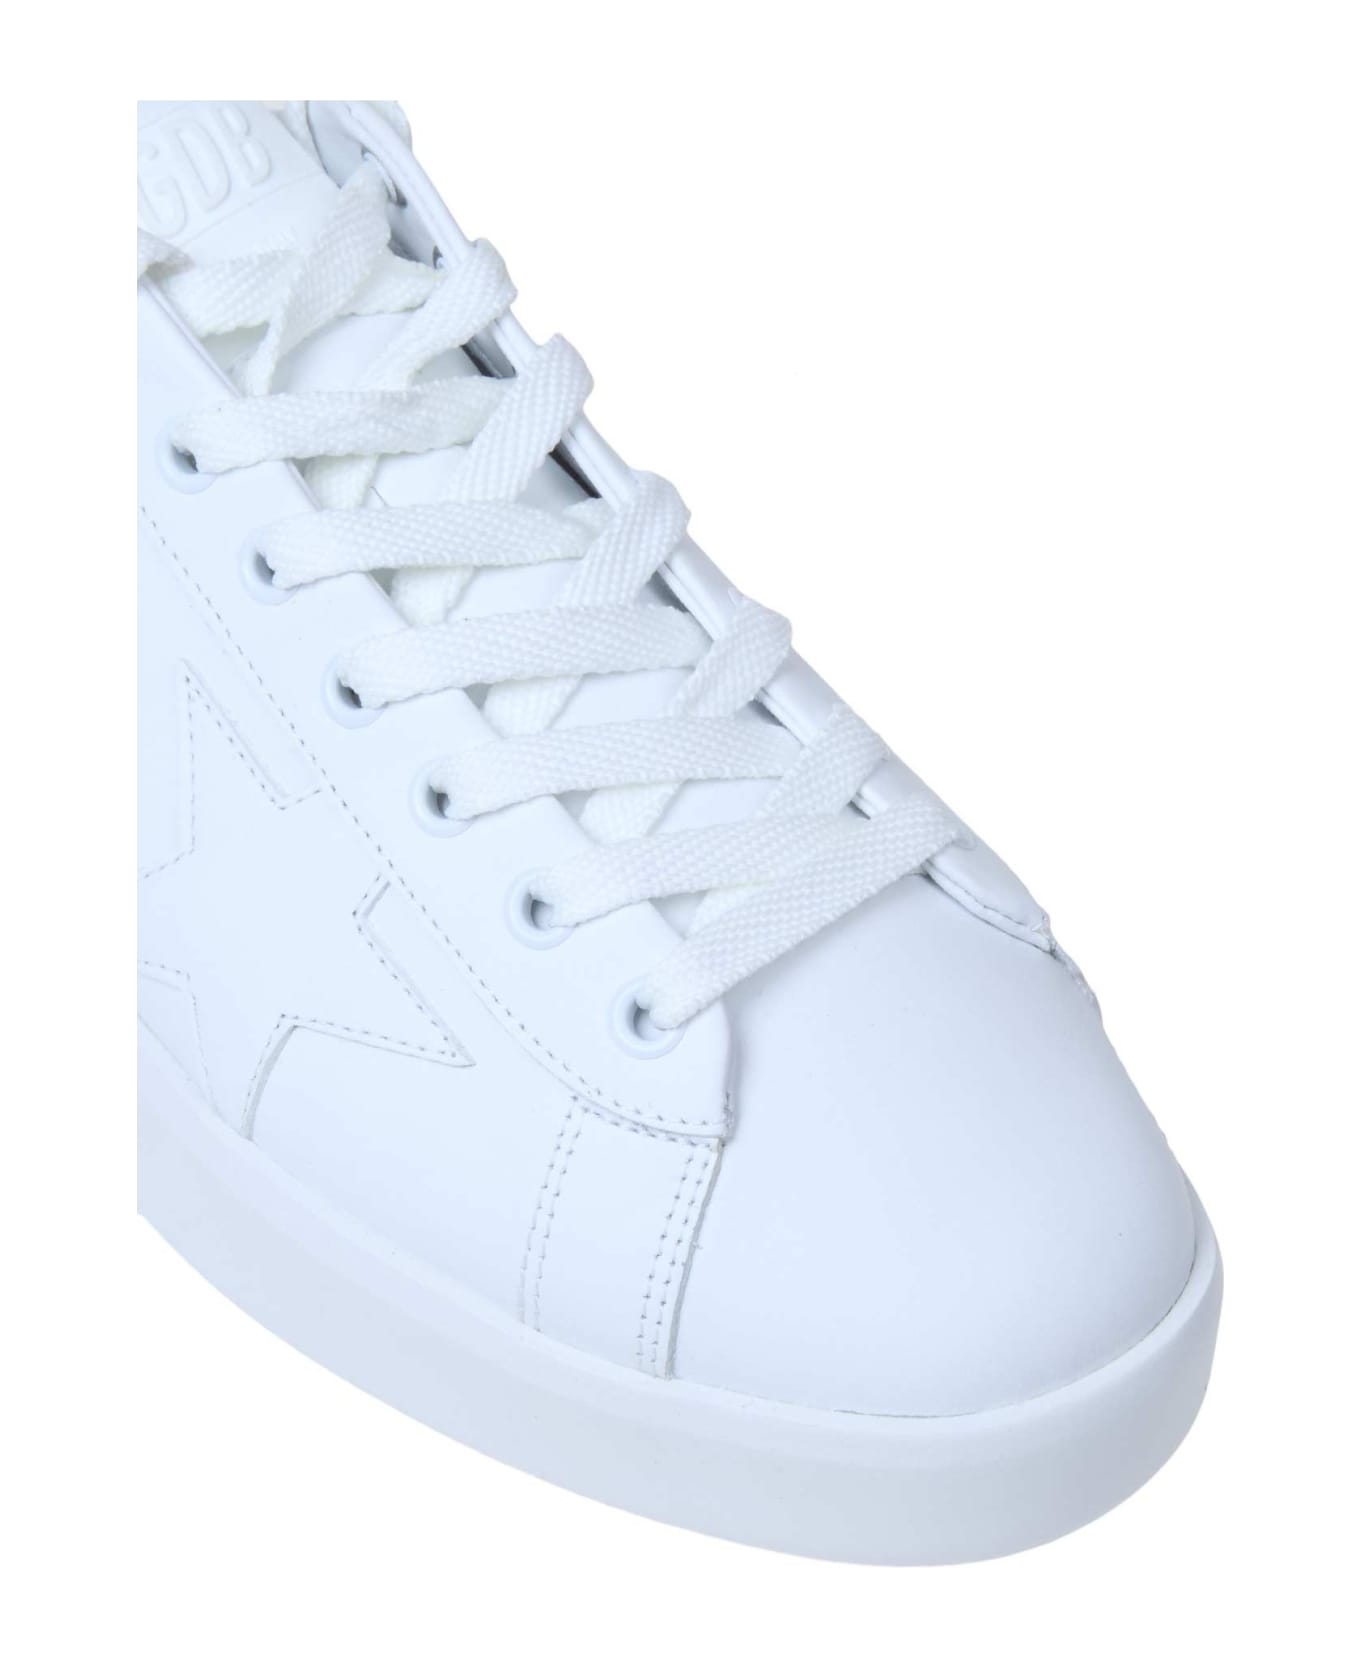 Golden Goose Pure Star Leather Low-top Sneakers - White/Black